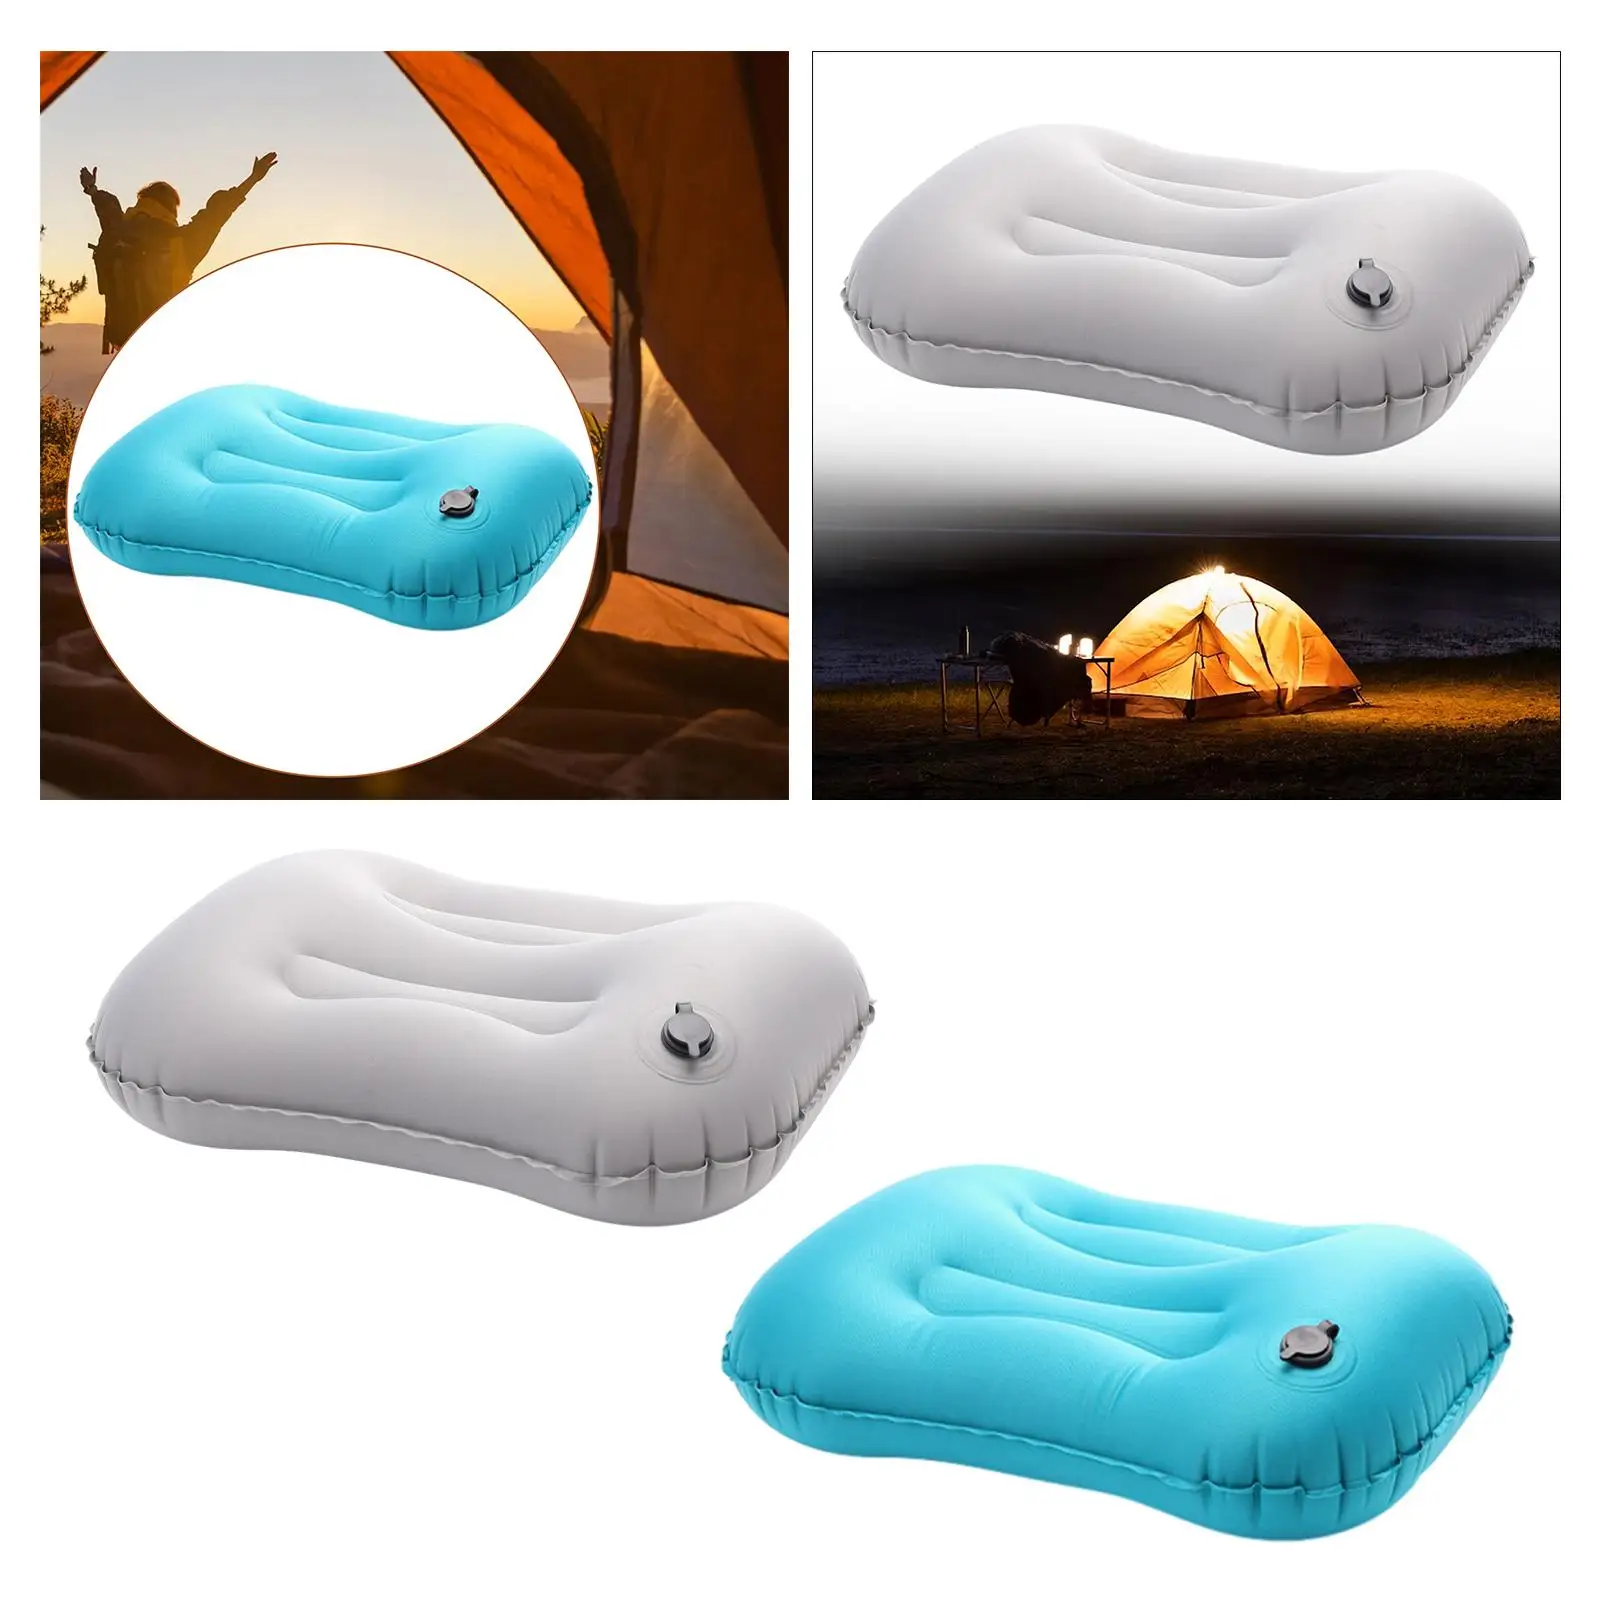 Camping Inflatable Pillow Portable Cushion for Neck Support Compressible Pillow for Nap Rest Beach Backpacking Hiking Hammock